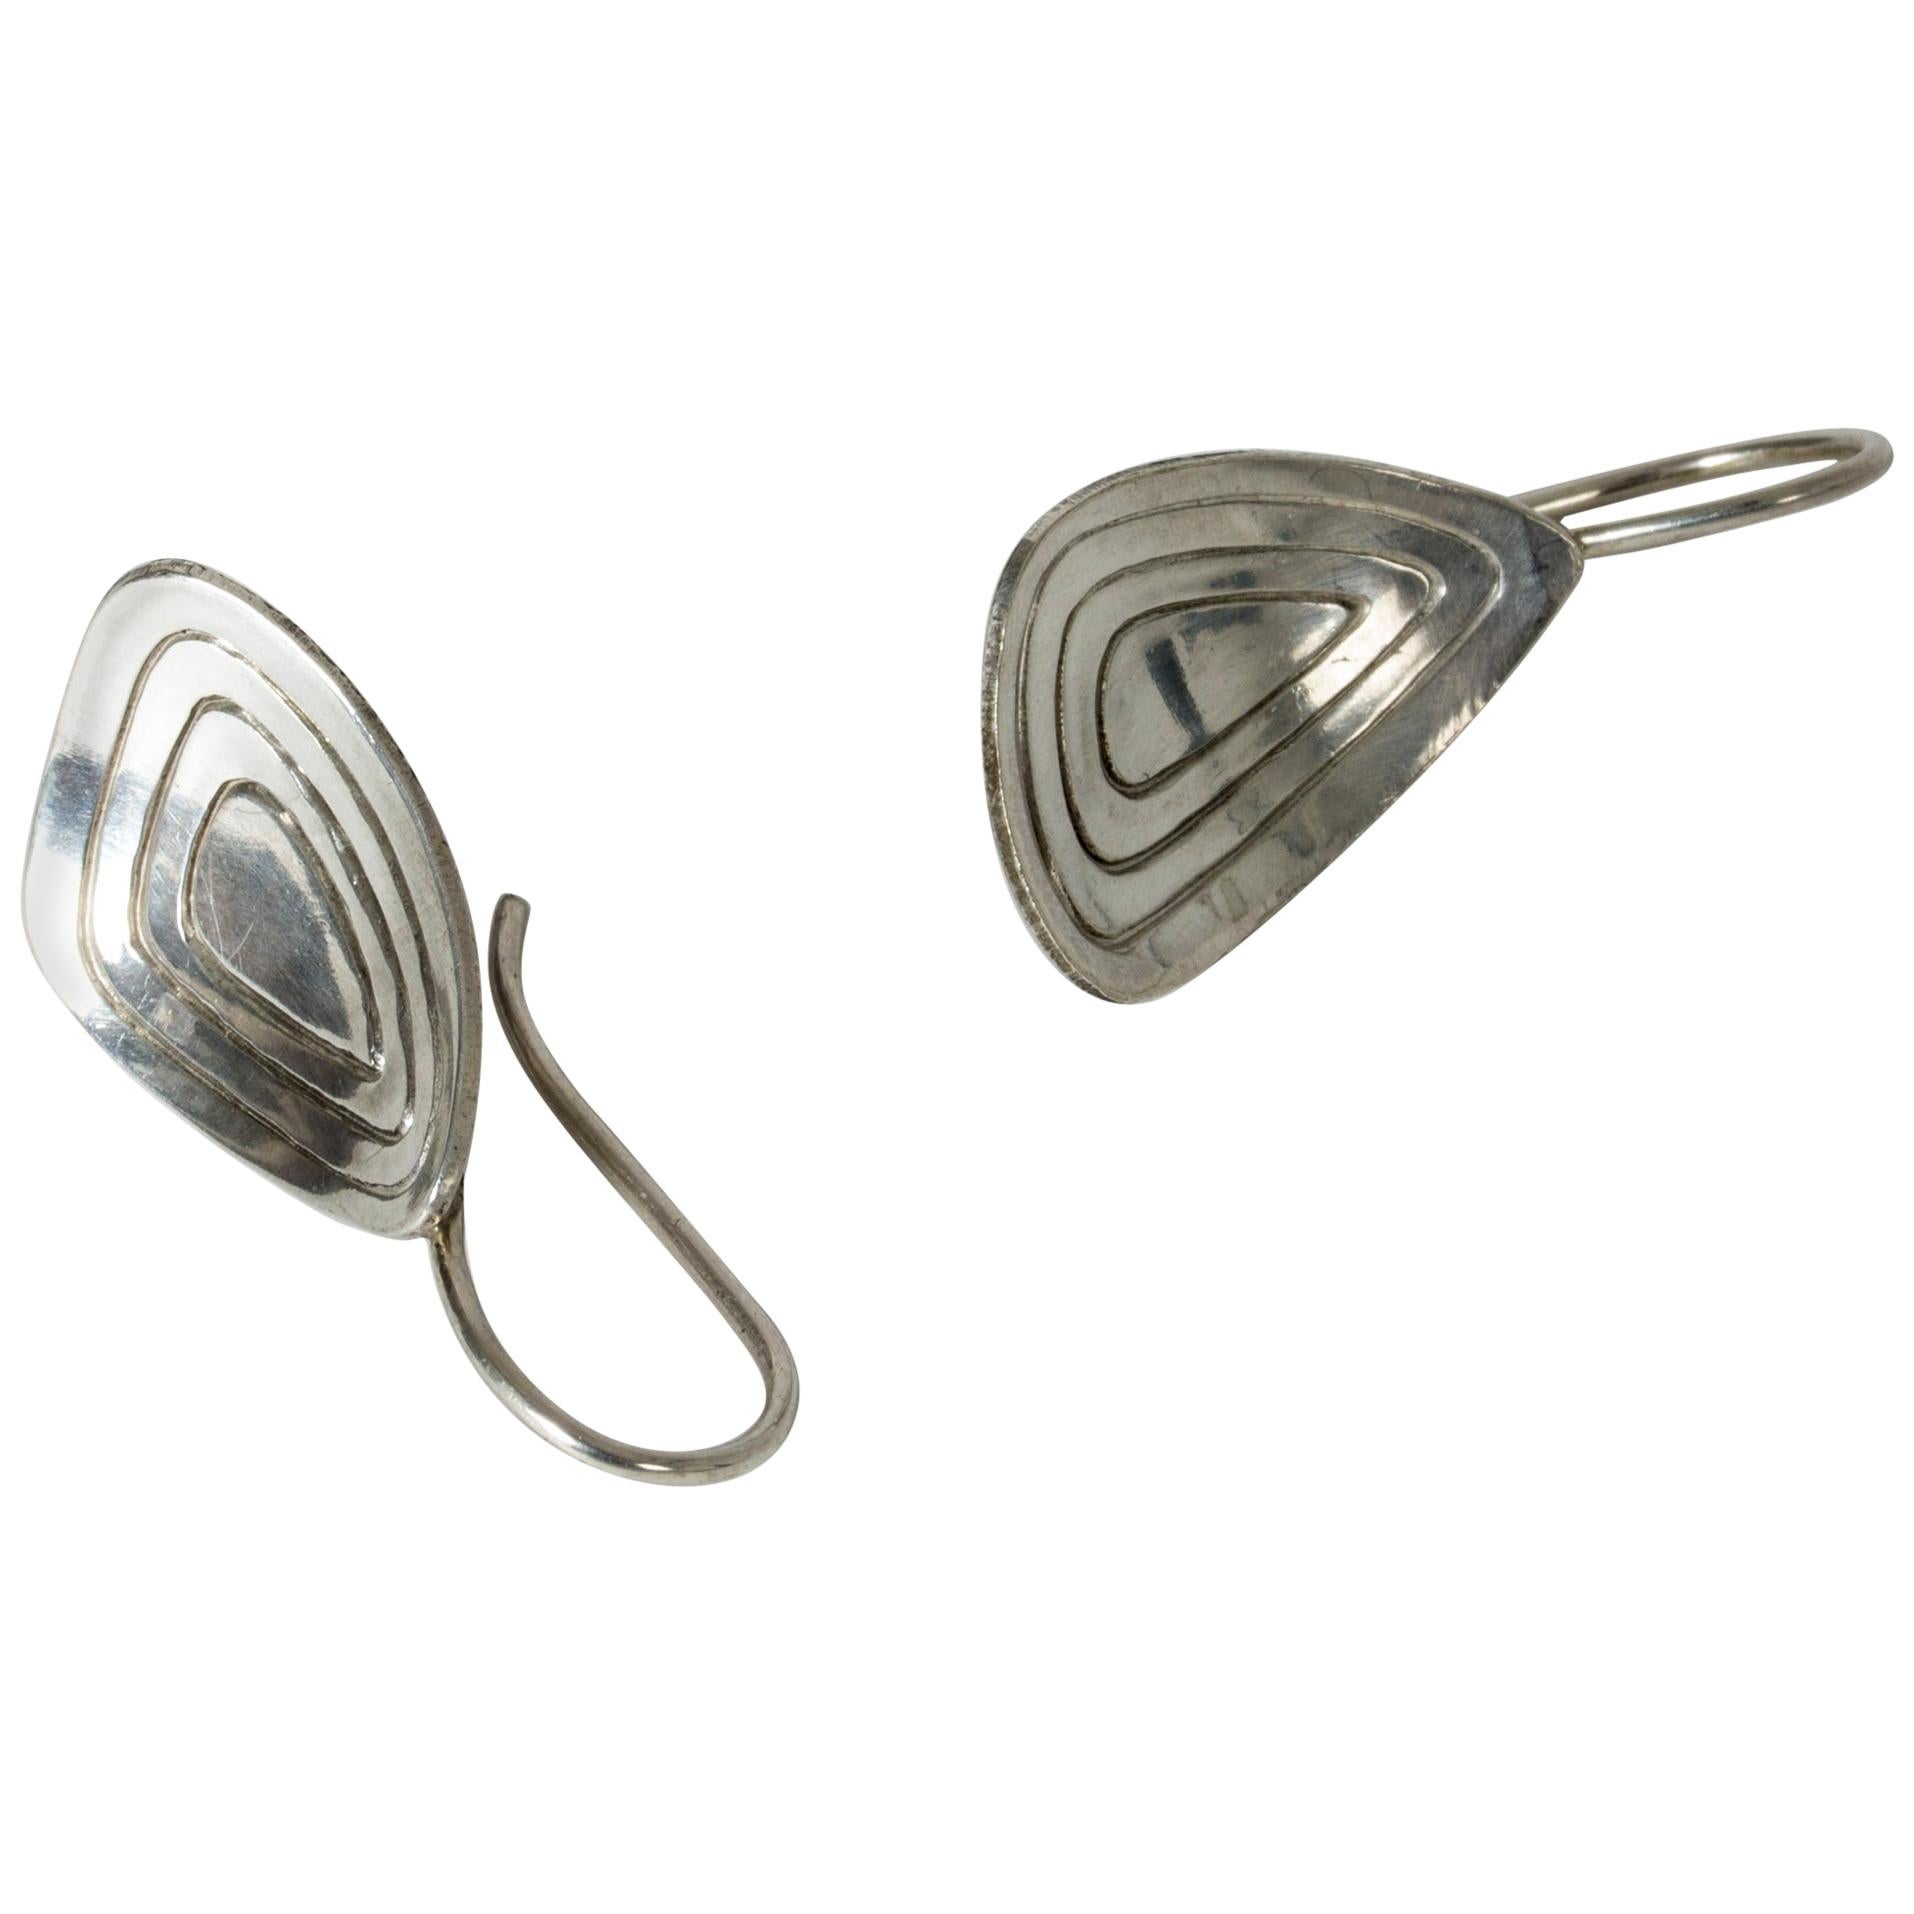 Pair of Silver Earrings from Alton